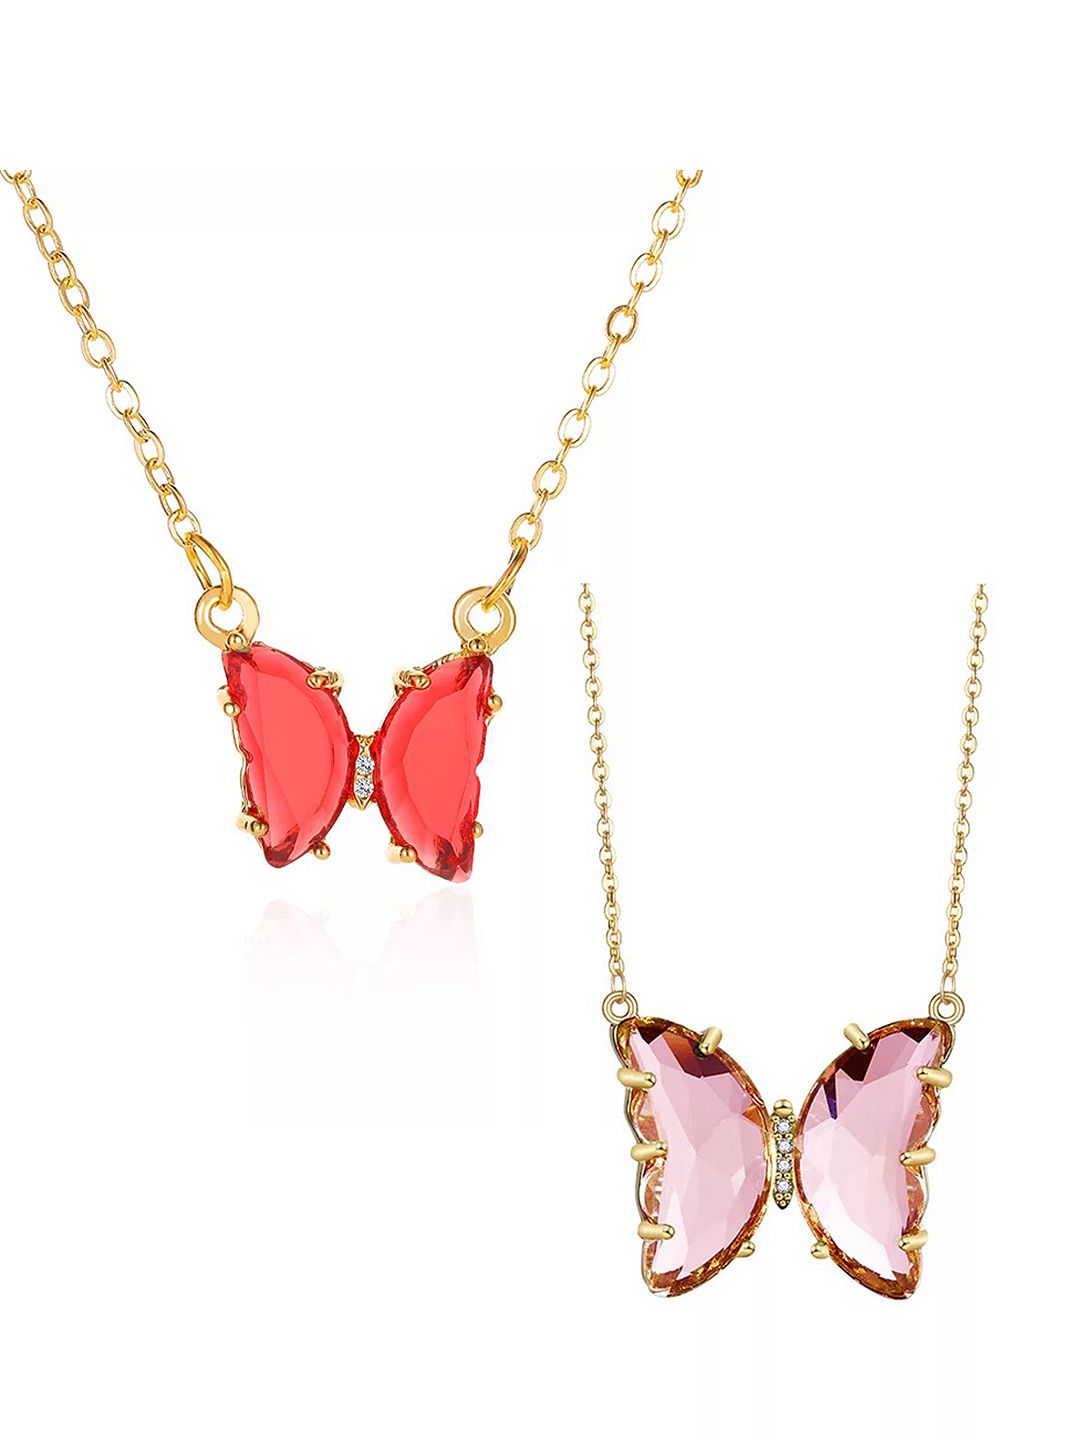 Vembley Women Set Of 2 Gold-Toned & Pink Gold-Plated Necklace Price in India